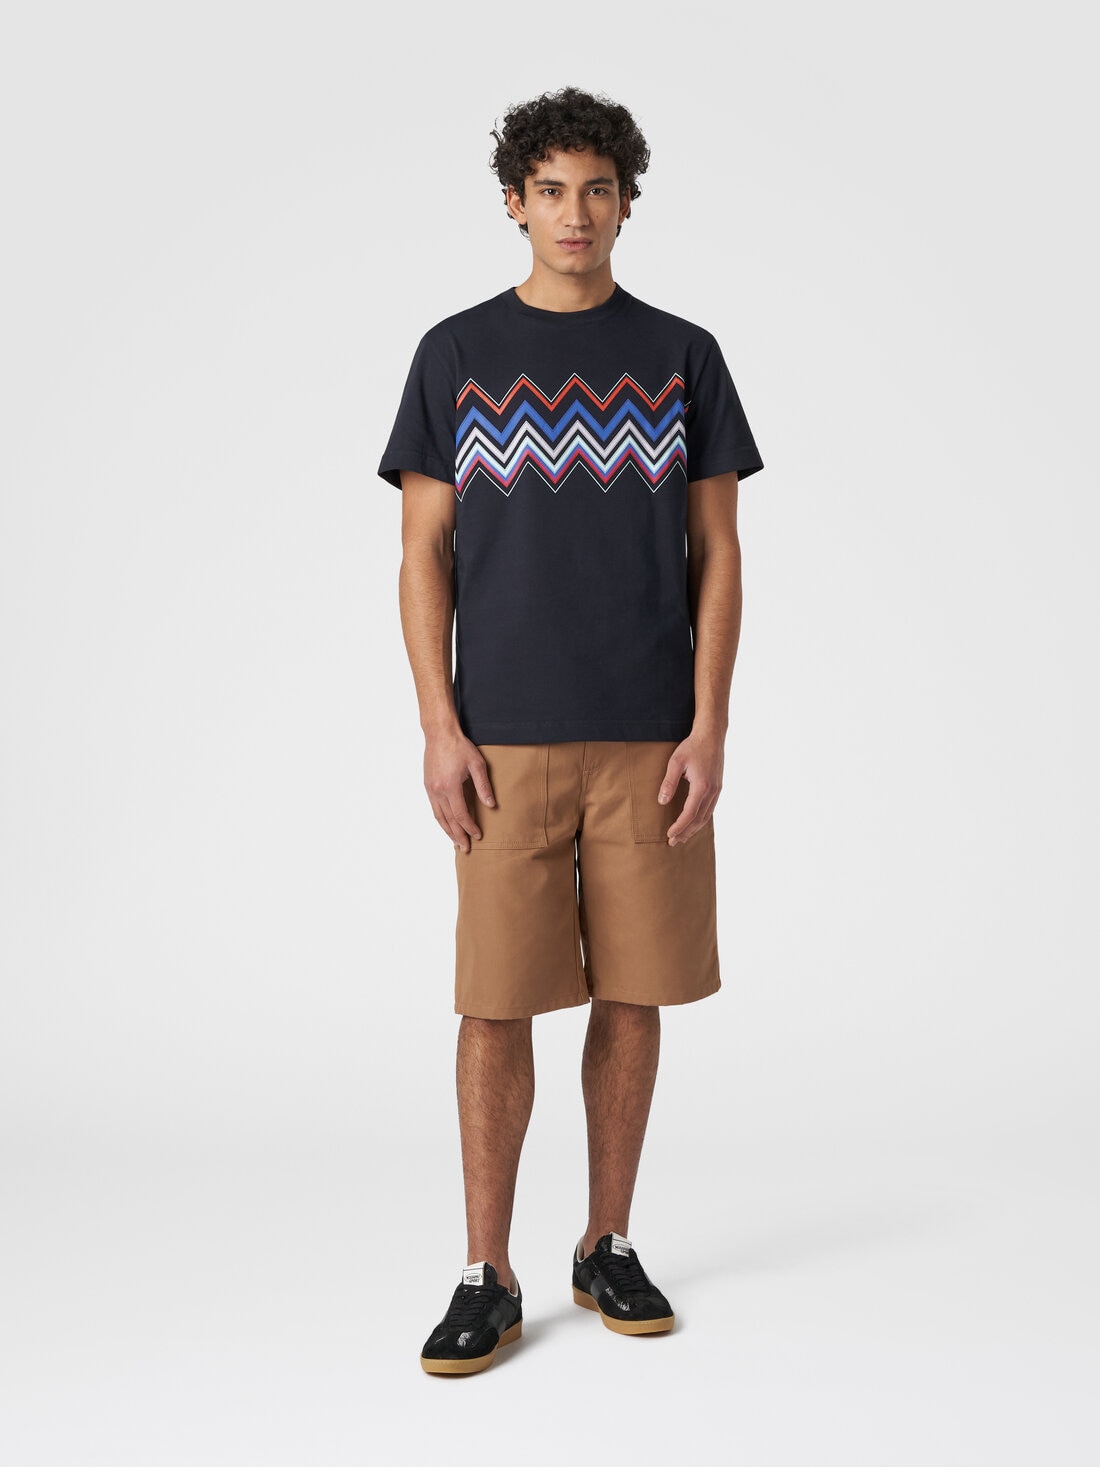 Short-sleeved T-shirt in cotton with zigzag print, Multicoloured  - US24SL0CBJ00J3S72E2 - 1